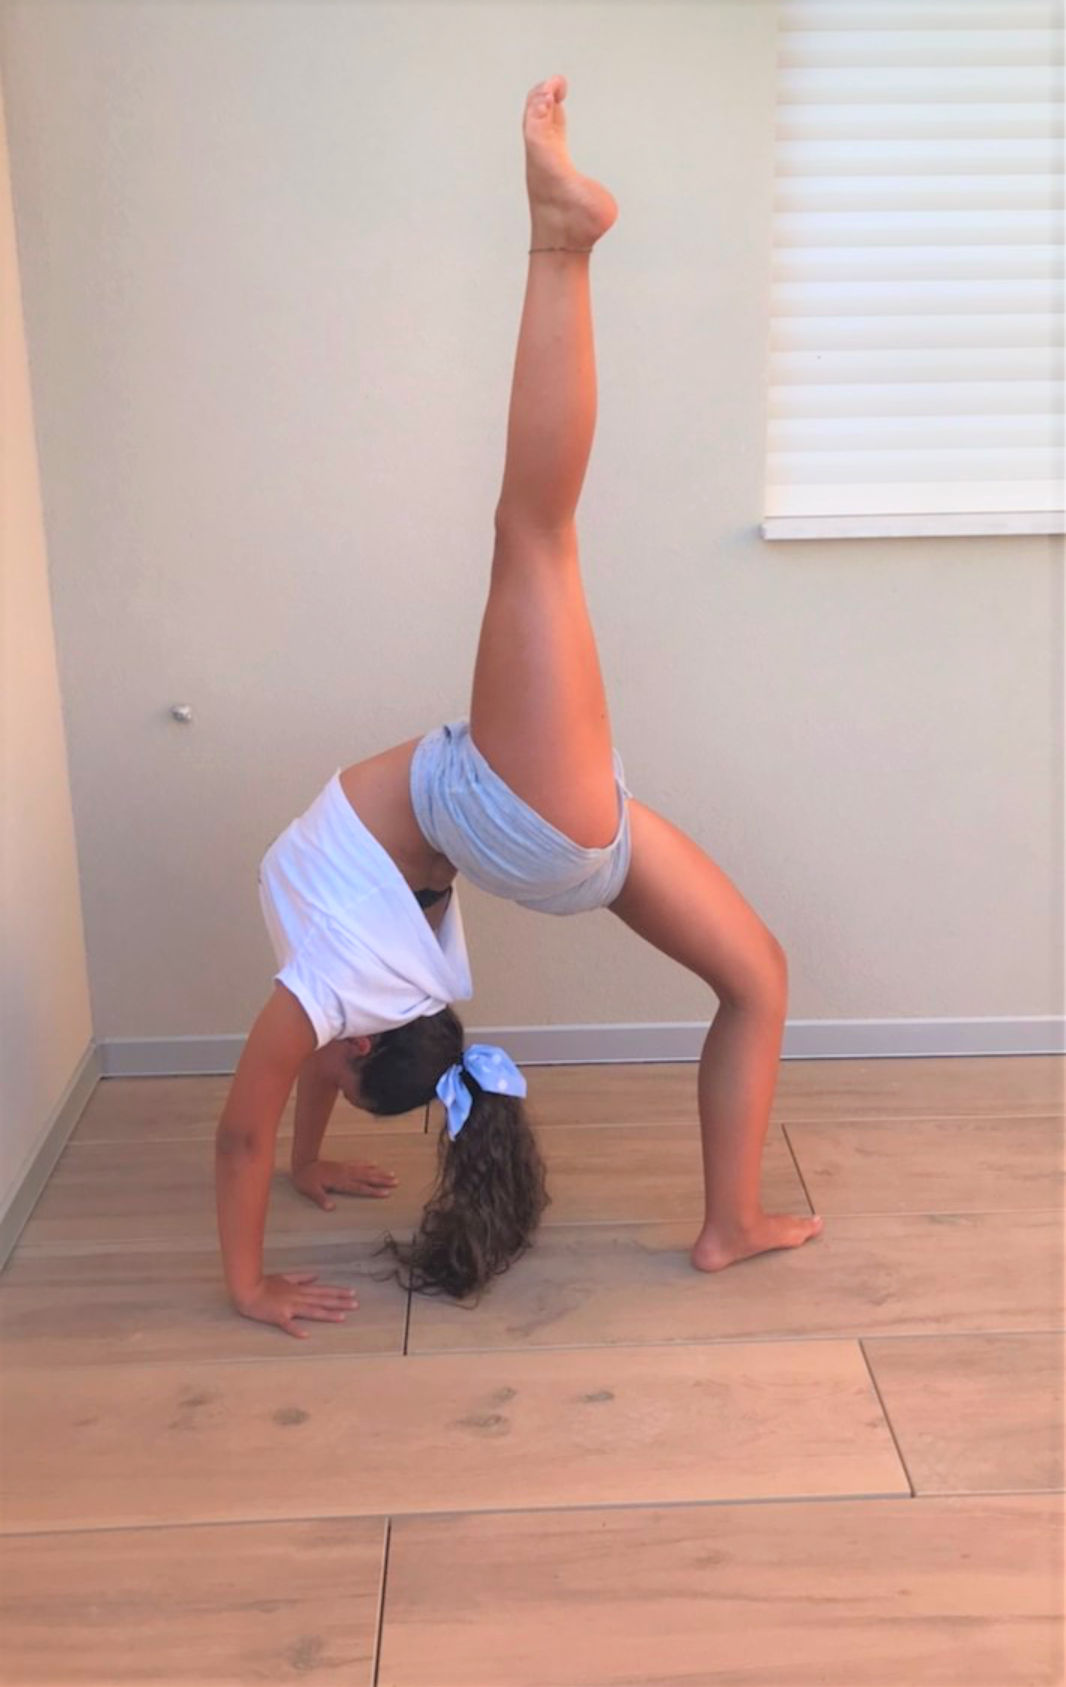 Dancer backbend with 1 leg extended straight up